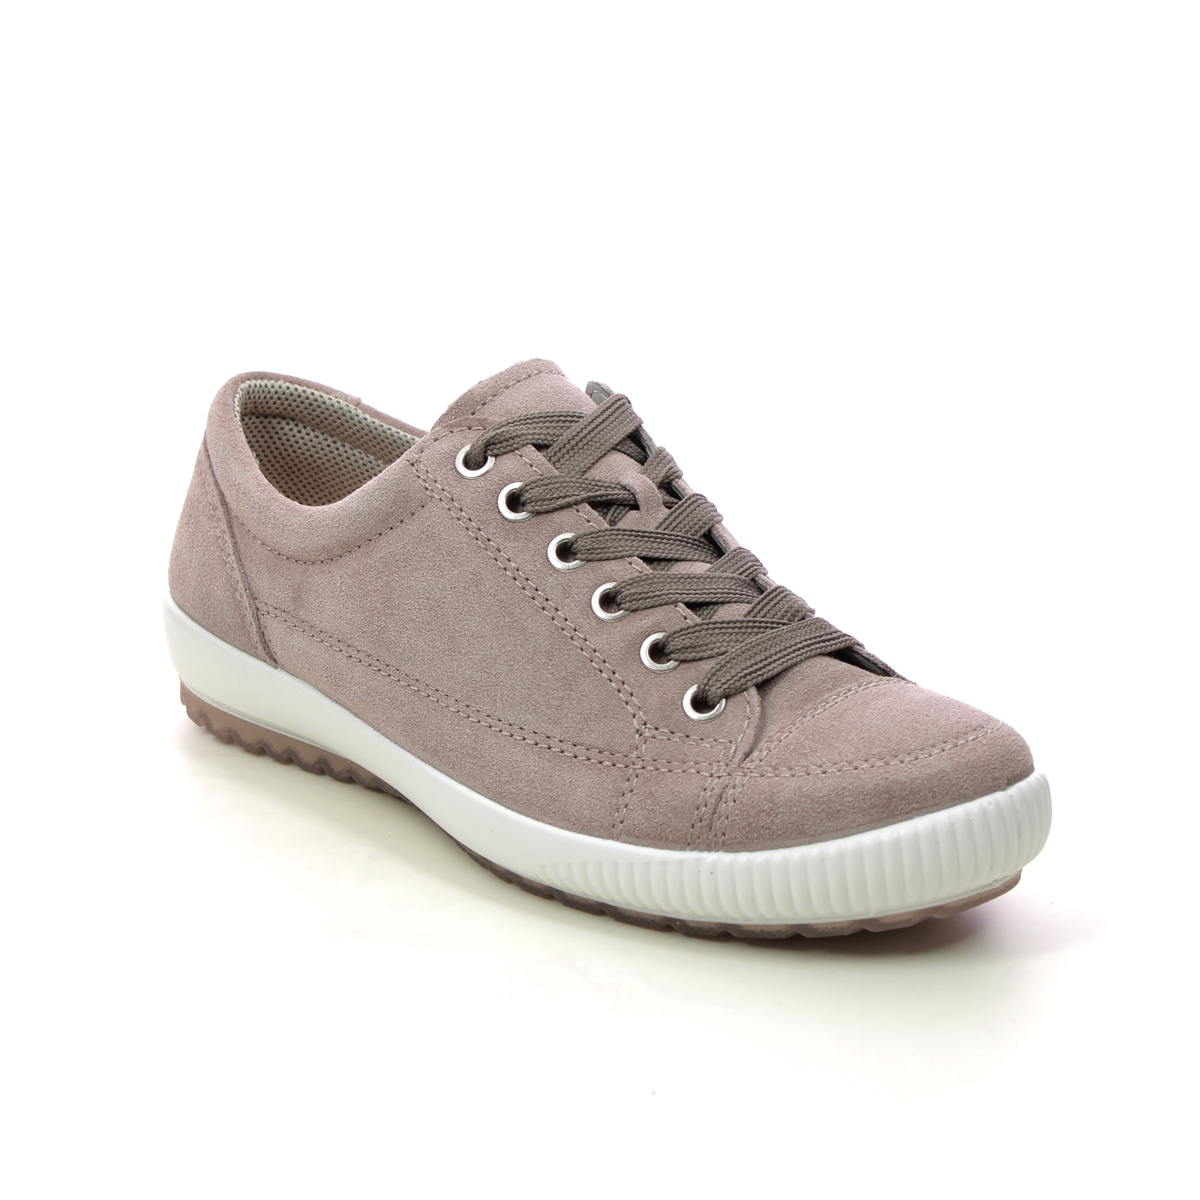 Legero Tanaro Stitch Taupe suede Womens lacing shoes 2000820-4010 in a Plain Leather in Size 4